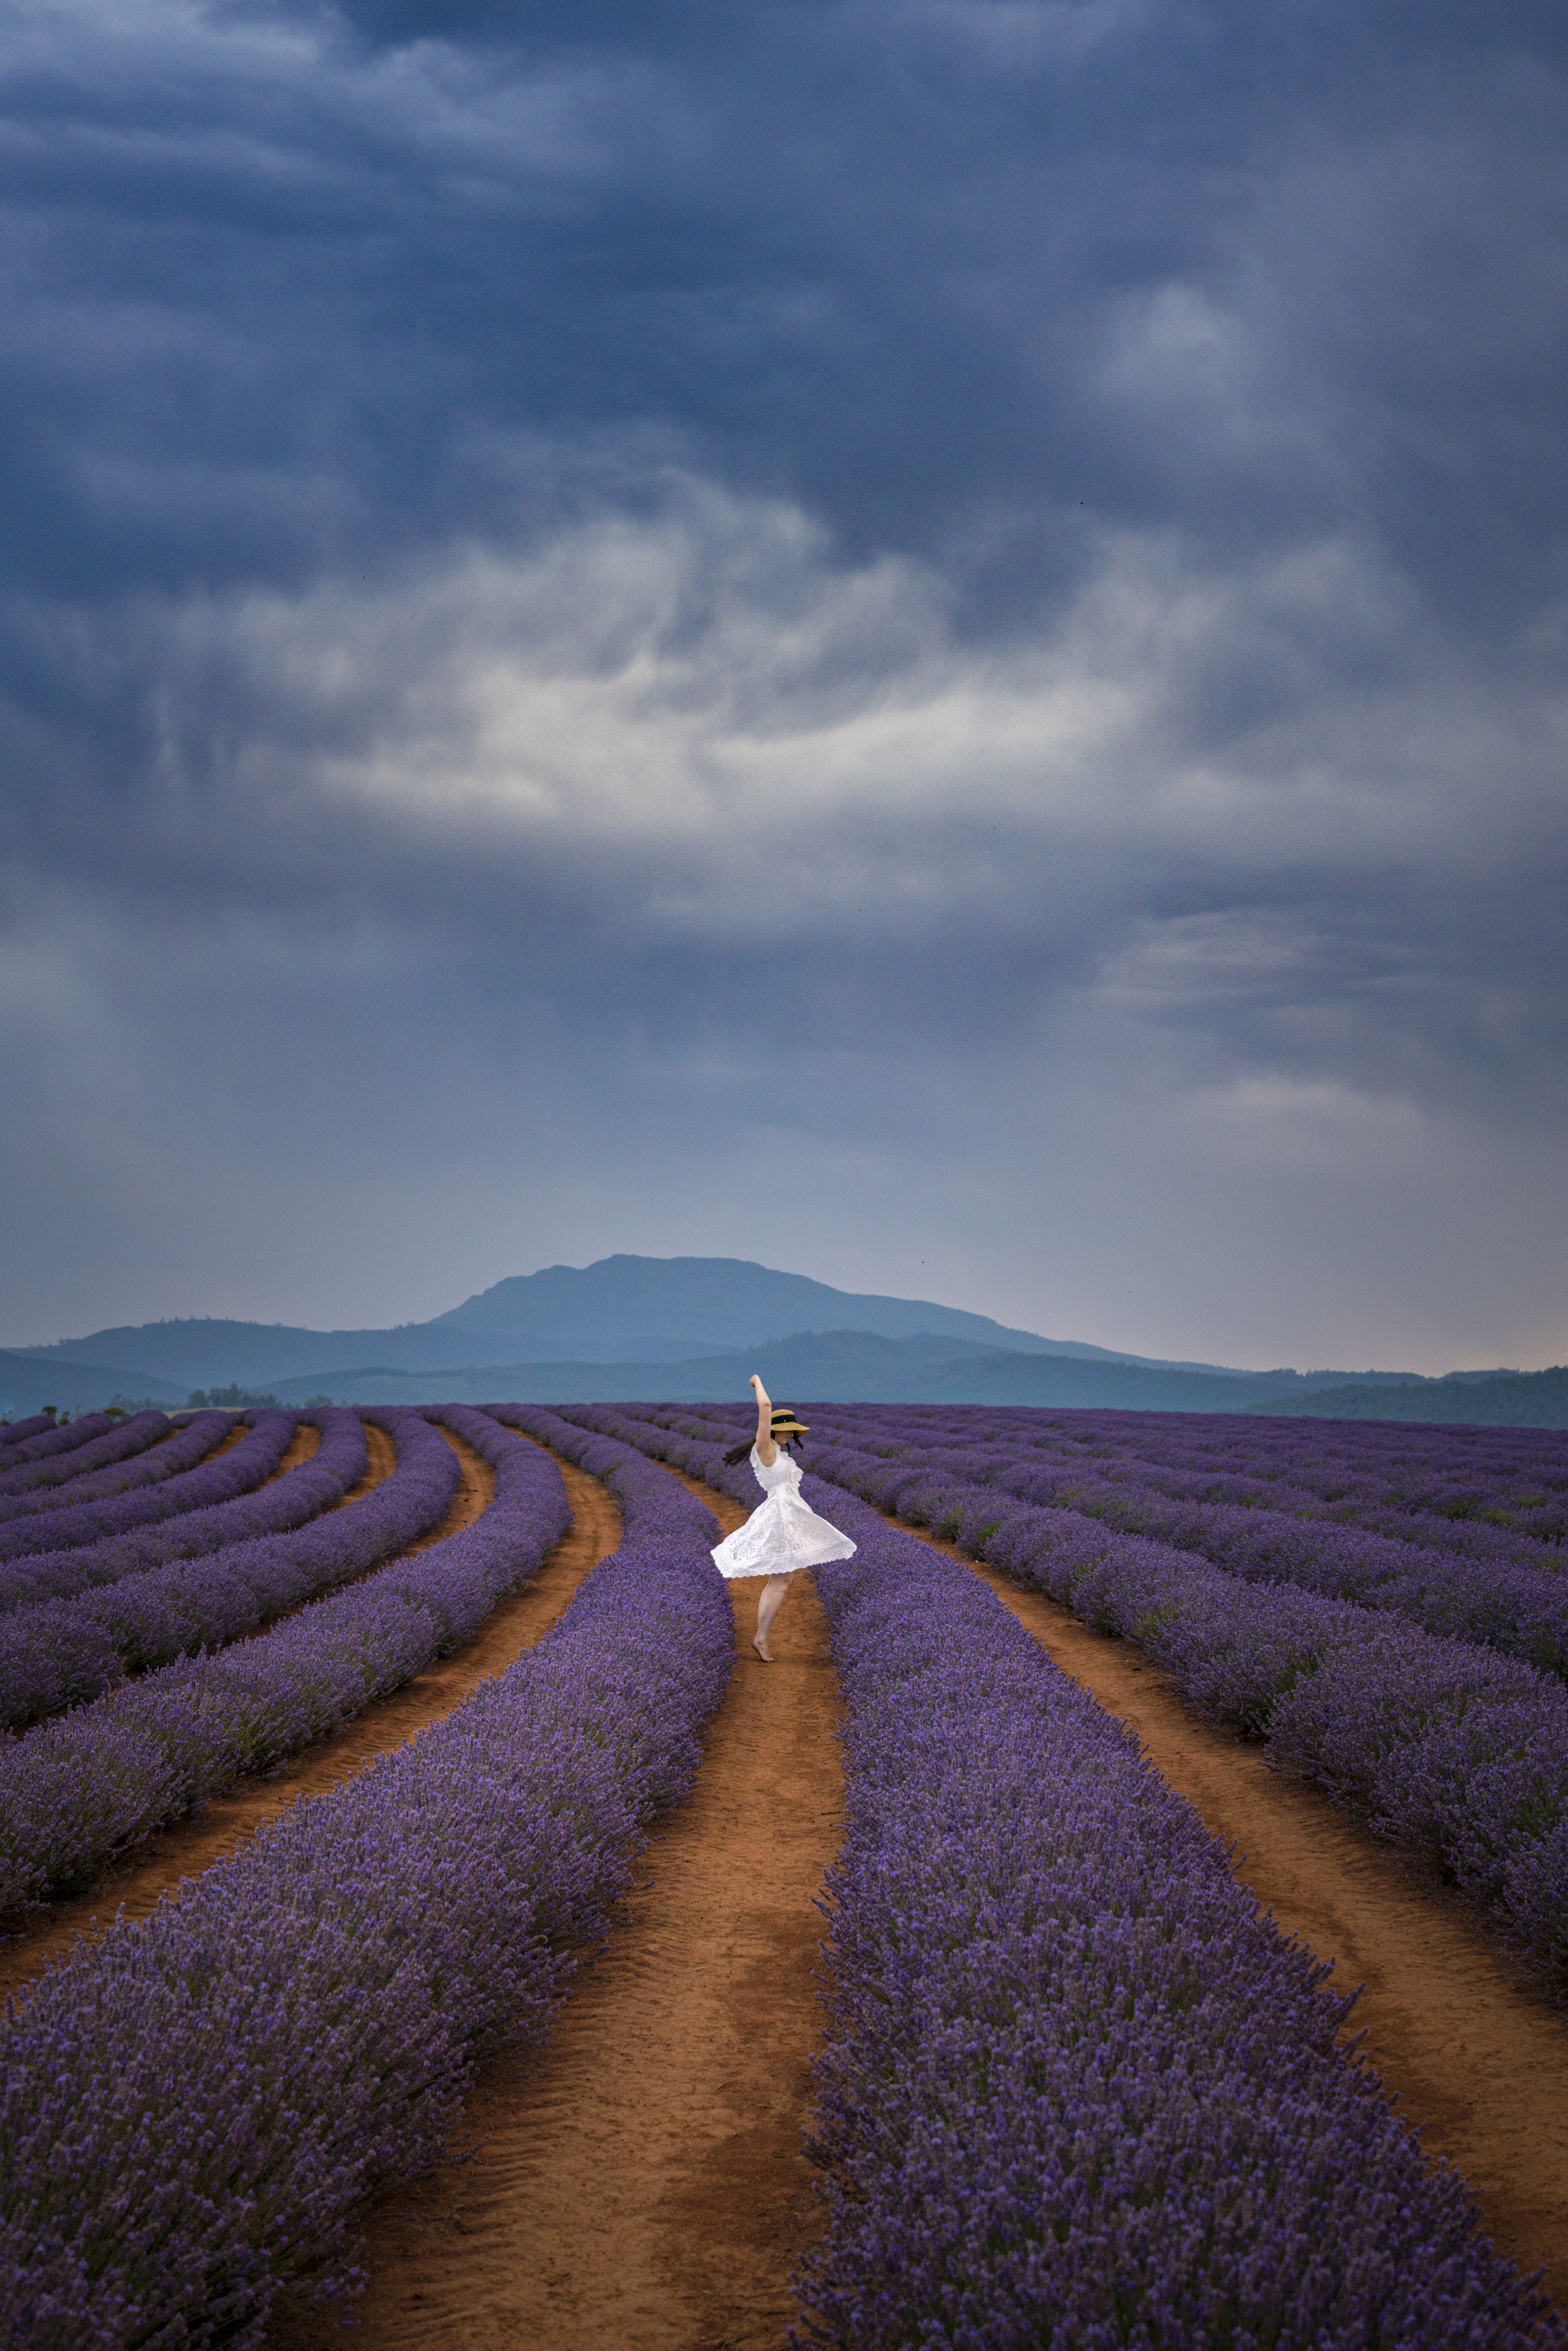 Woman in a white dress swirls around amongst the rows of lavender at Bridestowe Lavender Estate.